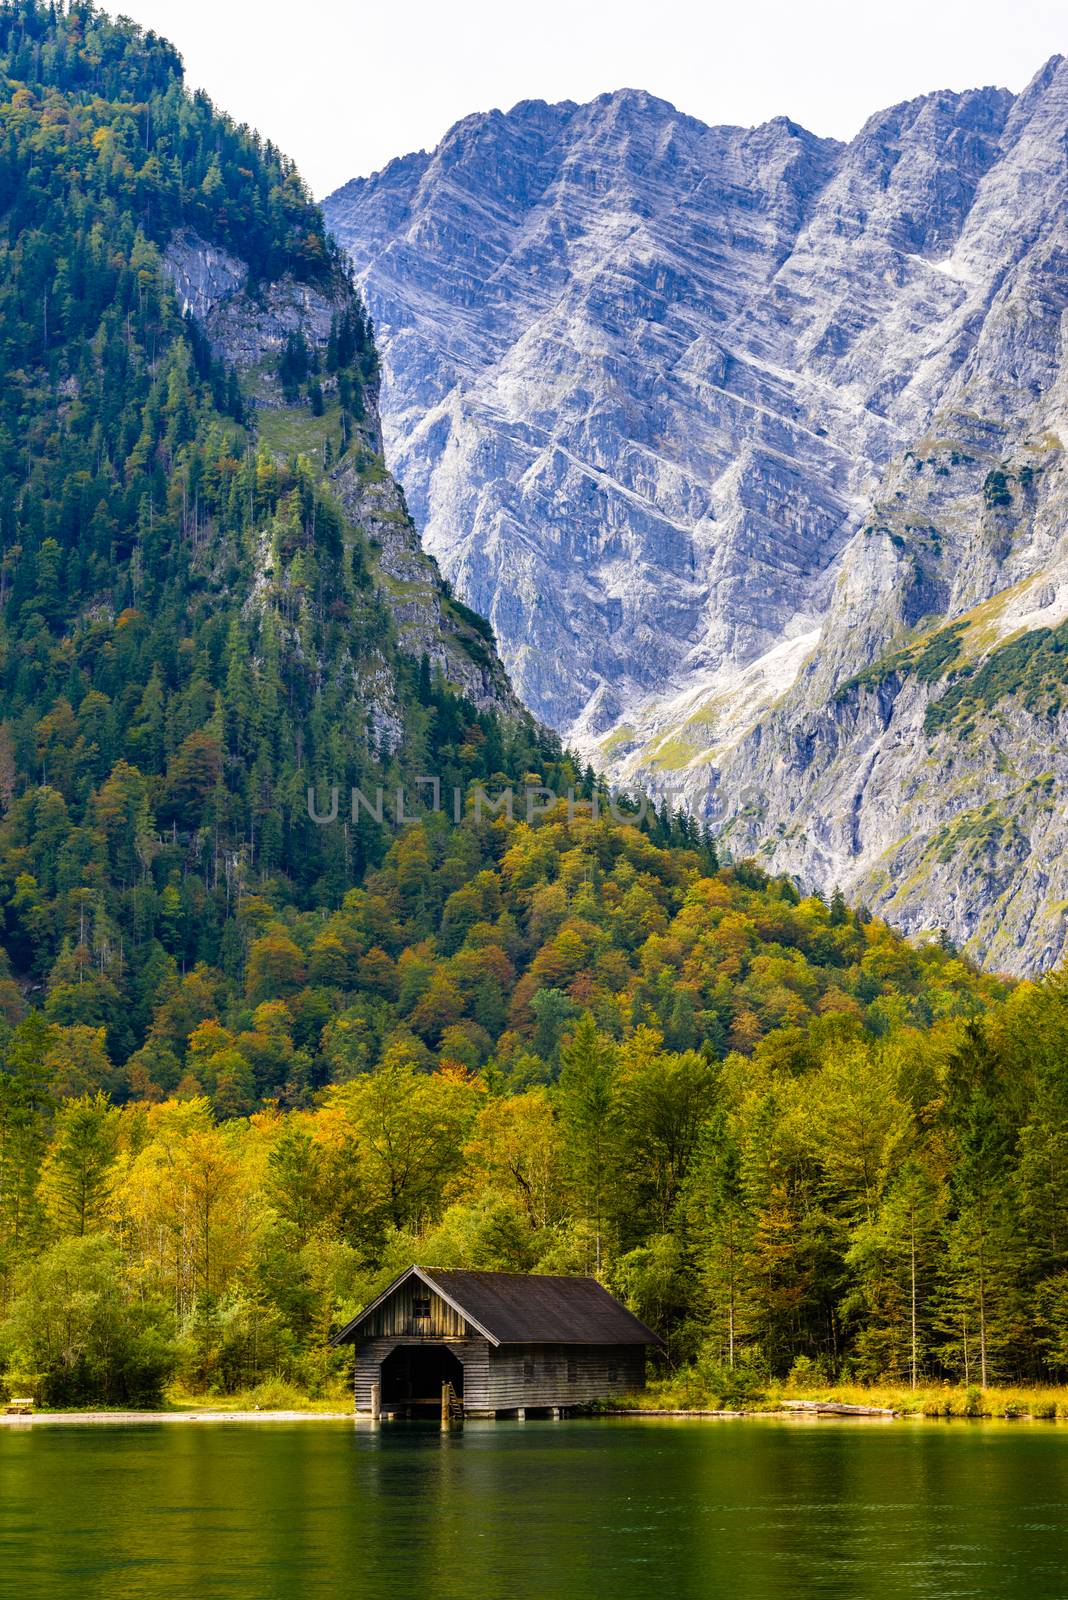 Wooden old fish house on the lake Koenigssee, Konigsee, Berchtesgaden National Park, Bavaria, Germany by Eagle2308